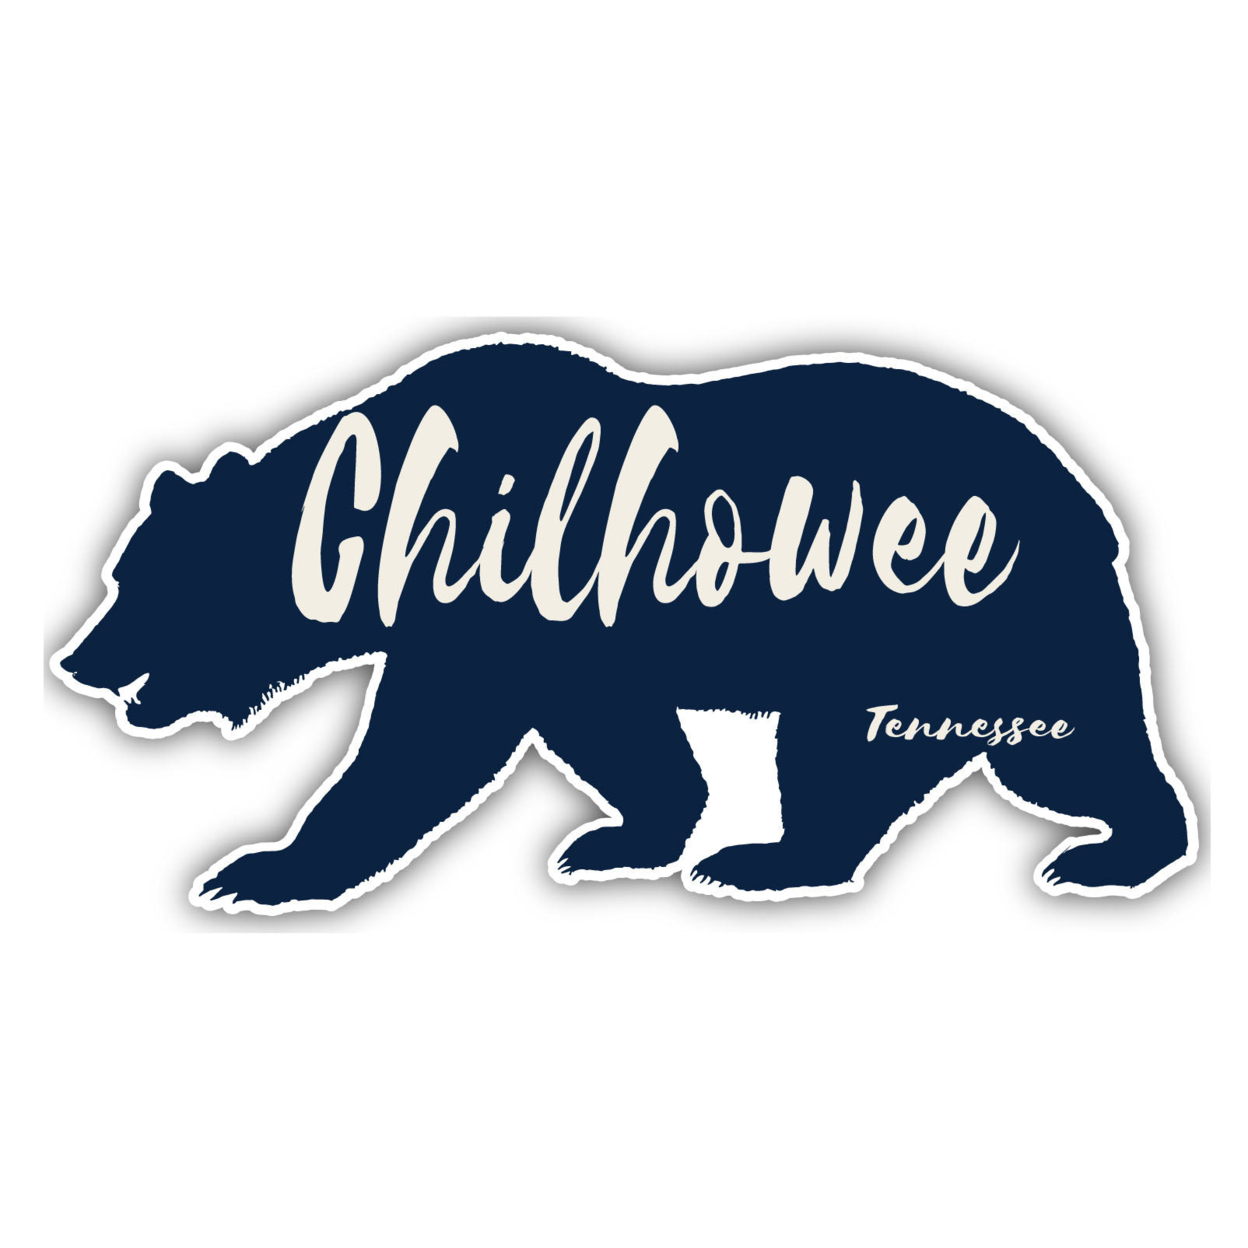 Chilhowee Tennessee Souvenir Decorative Stickers (Choose Theme And Size) - Single Unit, 6-Inch, Bear